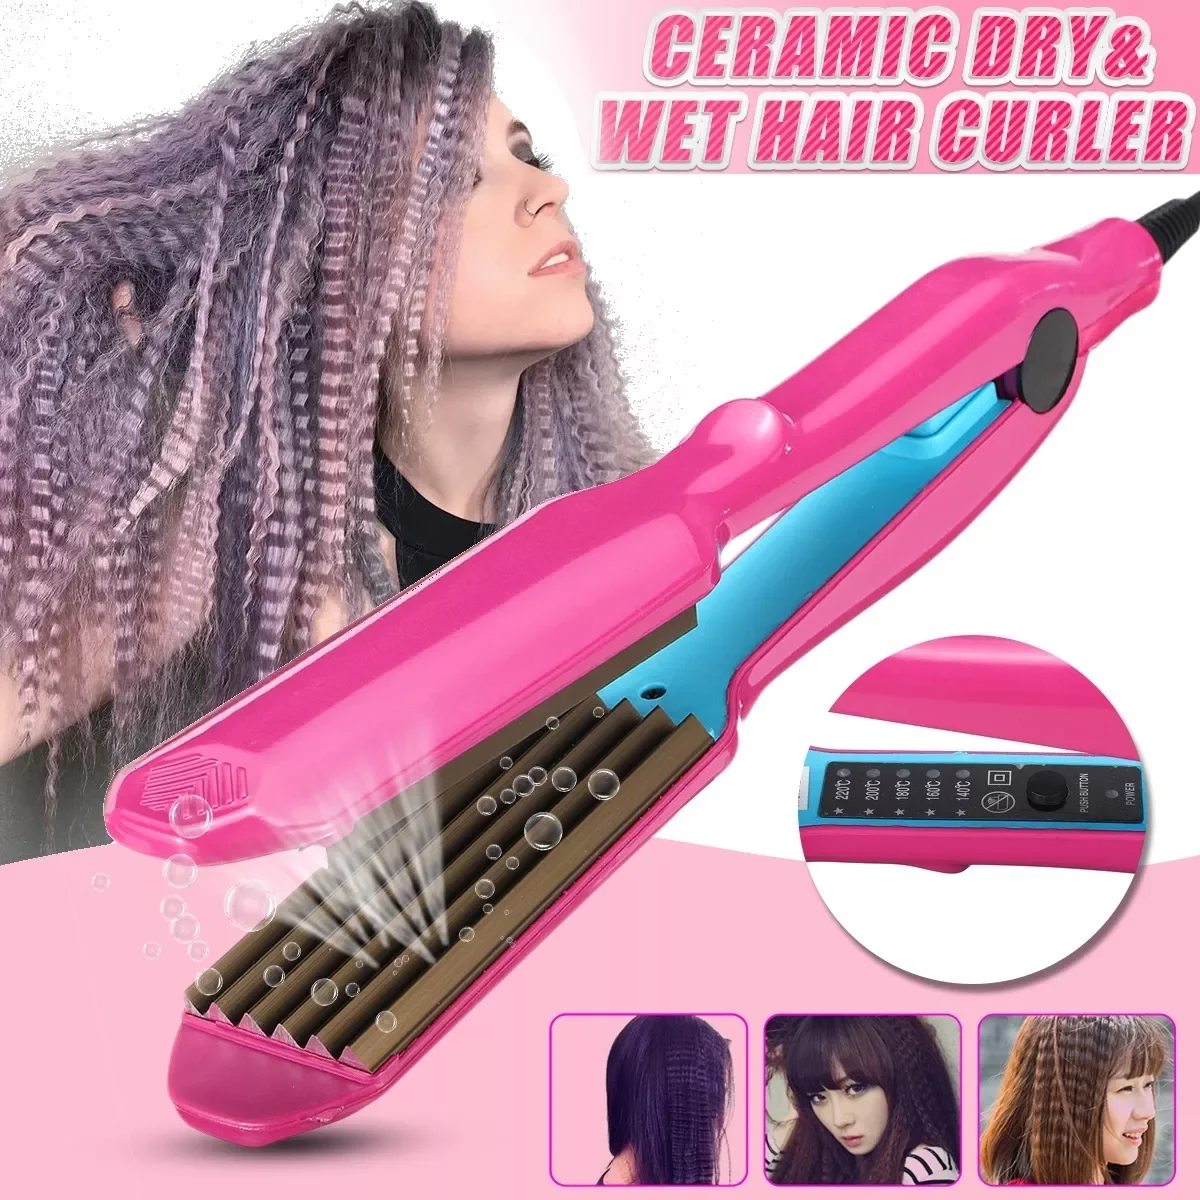 New in Hair Crimper Curler Dry & Wet Use Corrugated Irons Ceramic Curling Iron with Temperature Control Waving Tool free shi